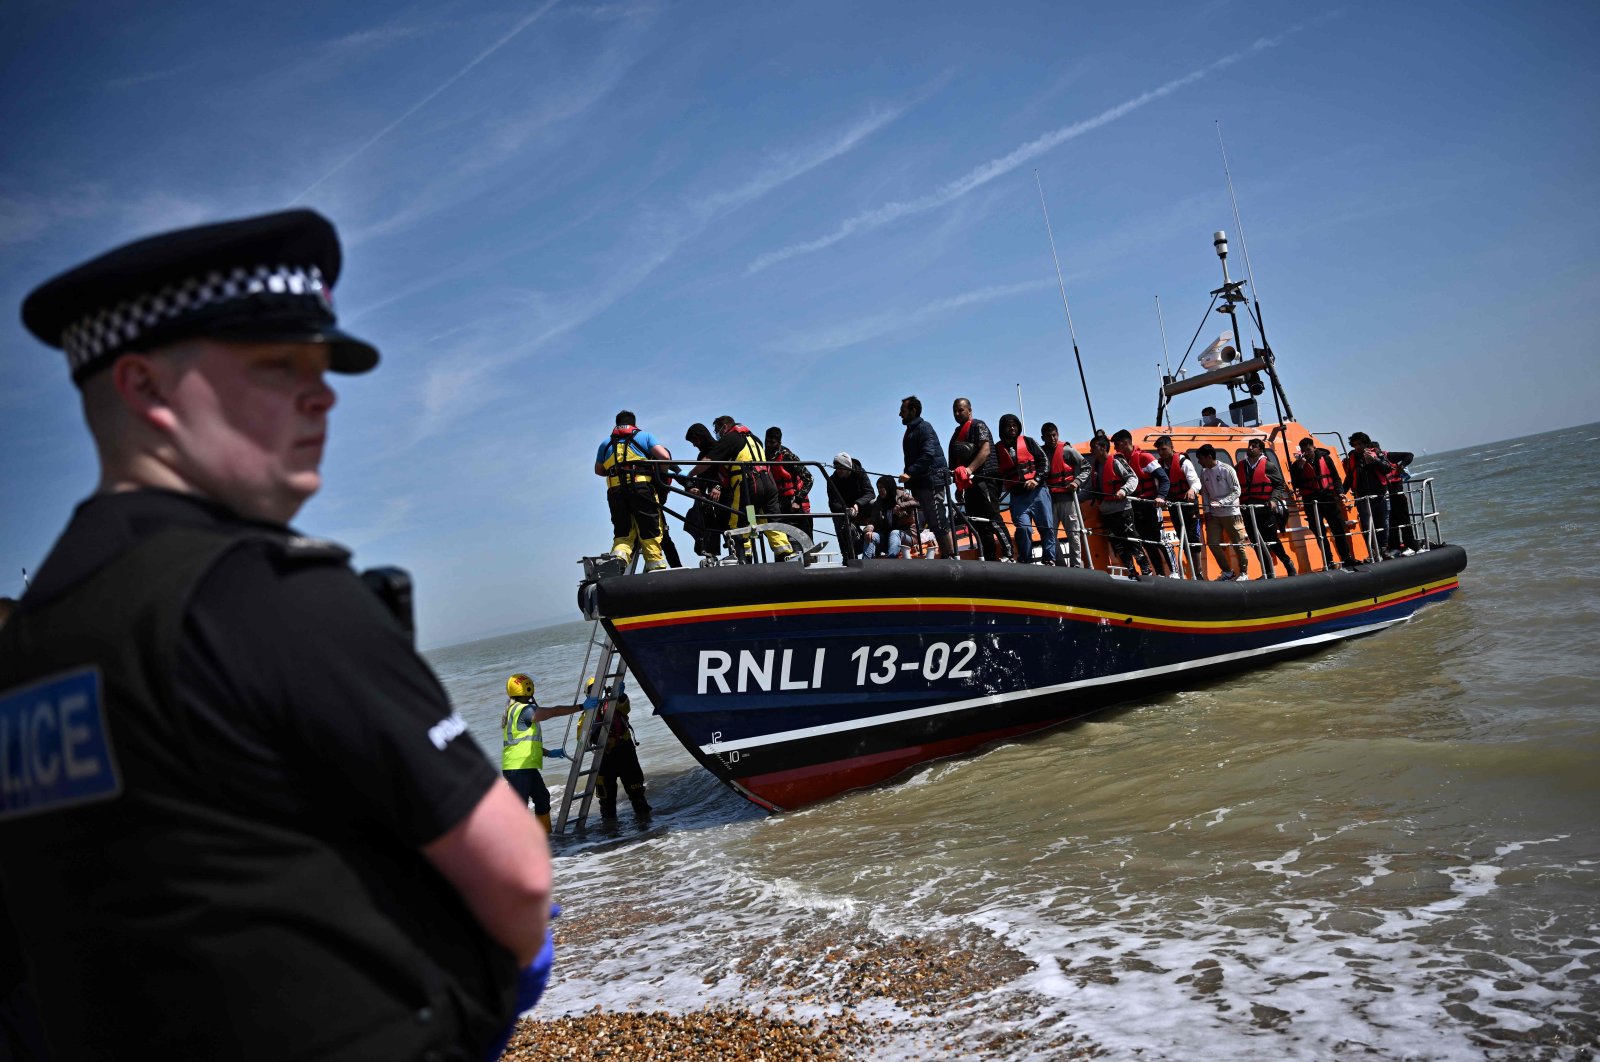 A British police officer stands guard on the beach of Dungeness, on the southeast coast of England, on June 15, 2022, as Royal National Lifeboat Institution&#039;s (RNLI) members of staff help migrants to disembark from one of their lifeboat after they were picked up at sea while attempting to cross the English Channel. (AFP Photo)